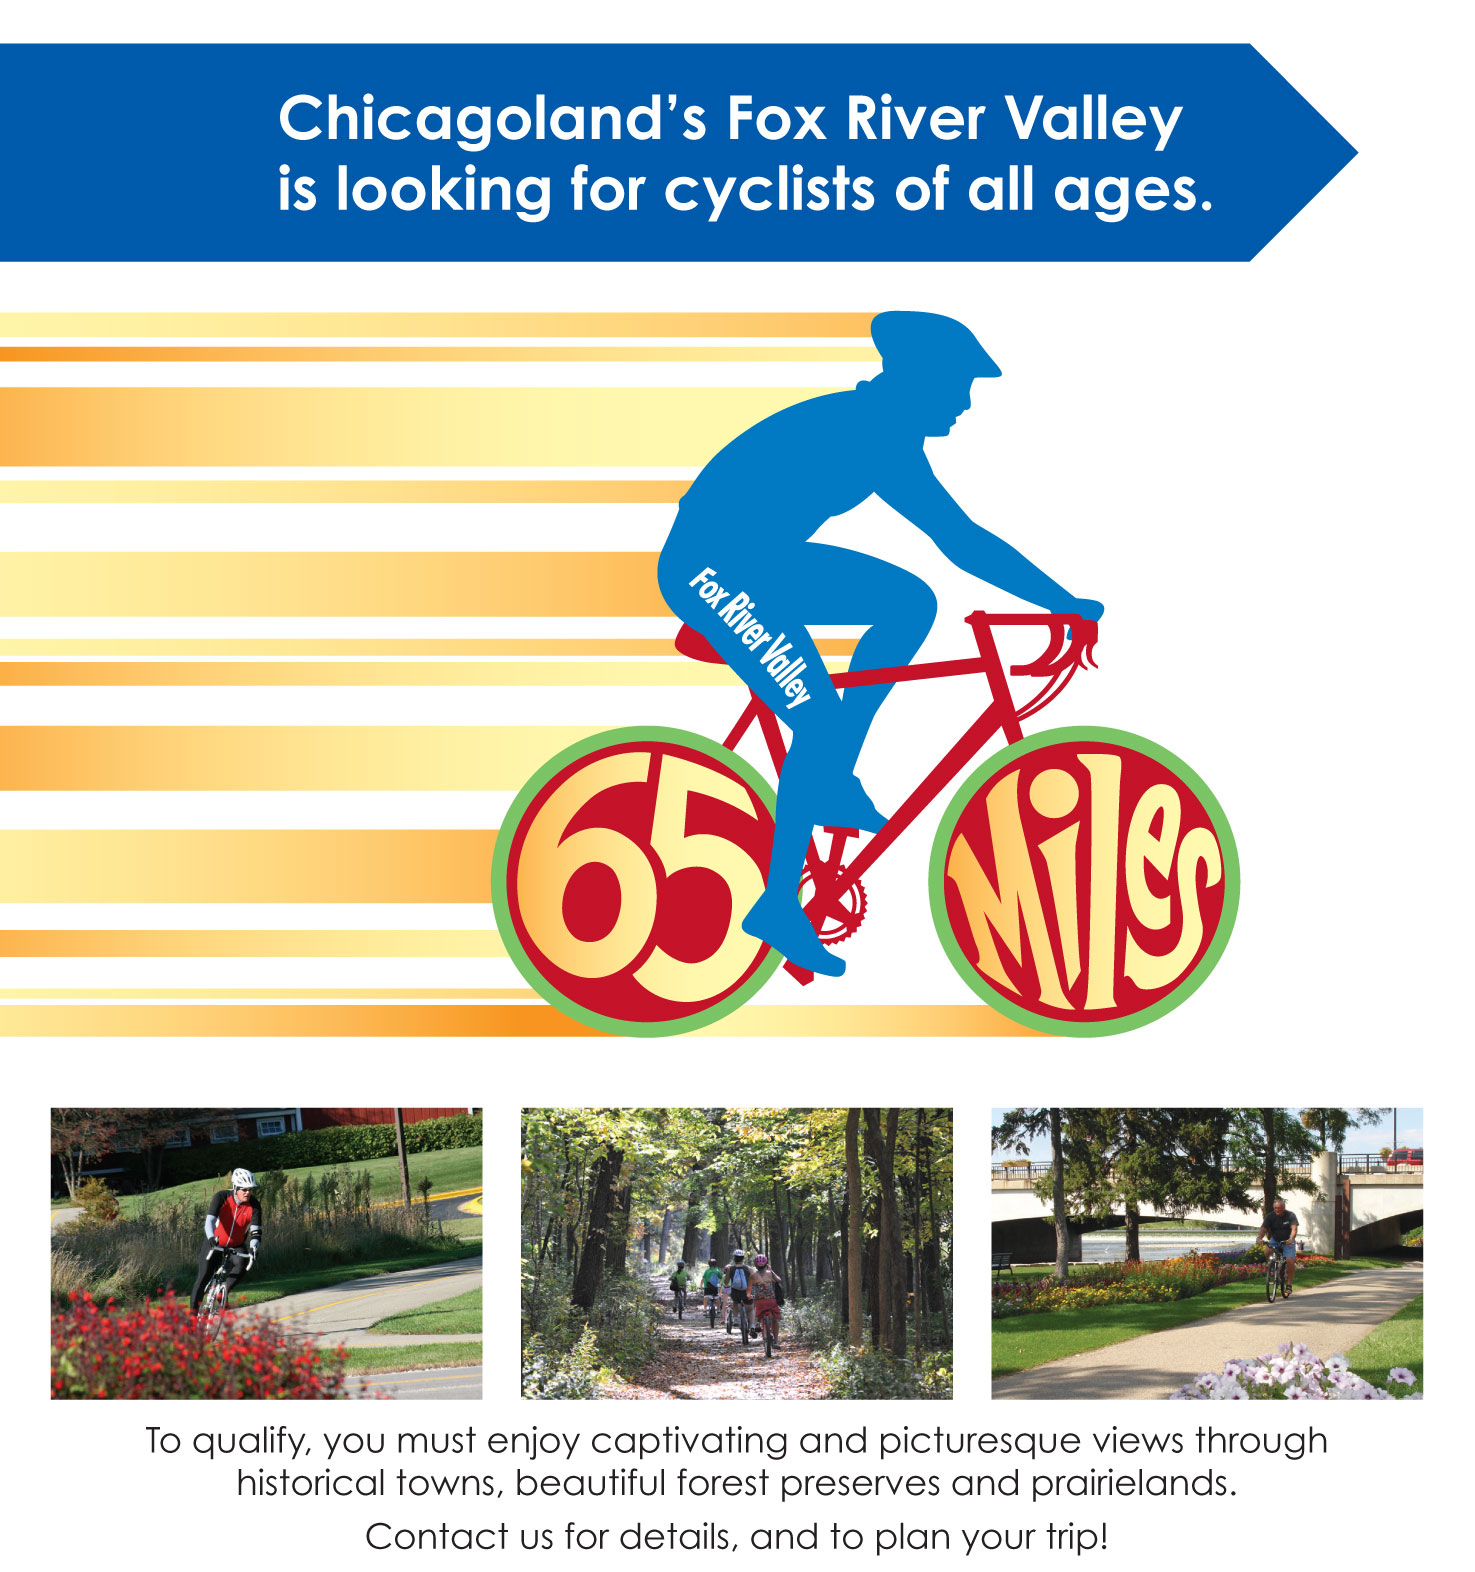 Chicagoland's Fox River Valley is looking for cyclists of all ages to enjoy 65 miles of trails!